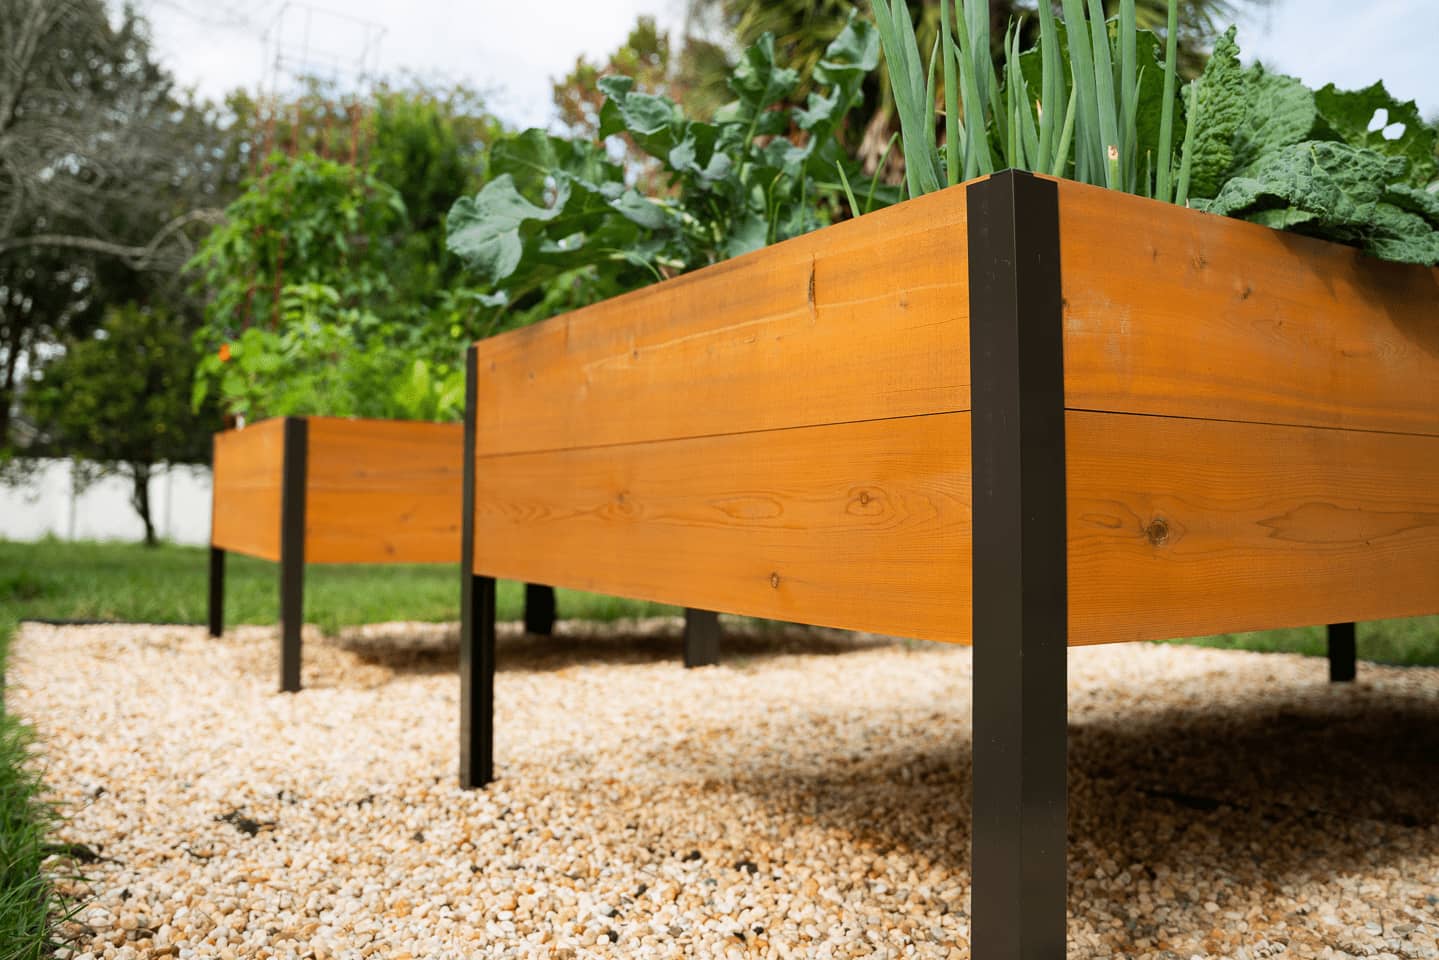 How To Build A Raised Garden Bed With Legs